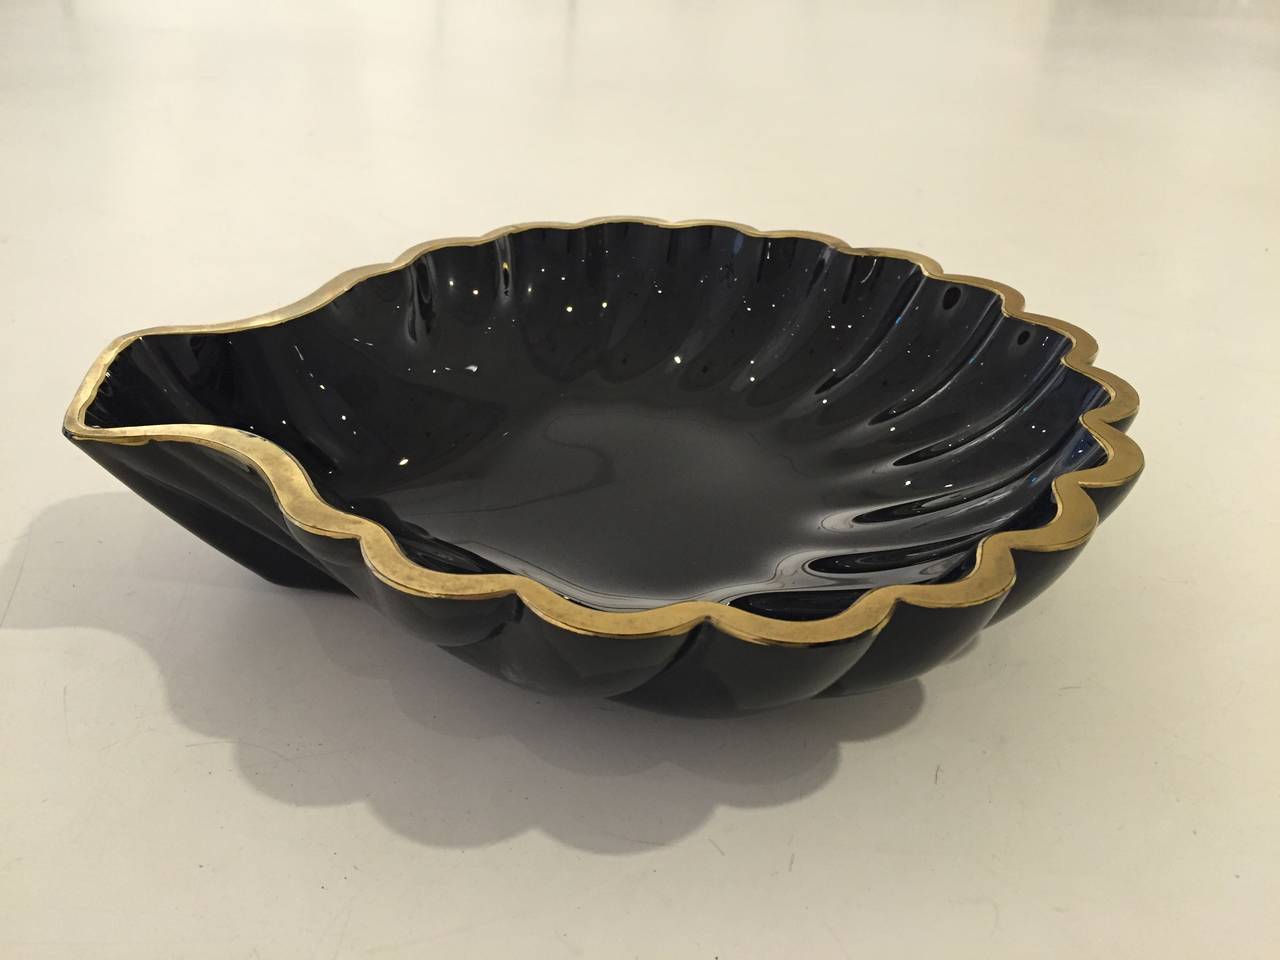 Shining black opaque Murano glass scallop shell bowl with a hand-applied matte gilt edge. By Cenedese, 1950s, retaining original retailer's paper label on bottom.